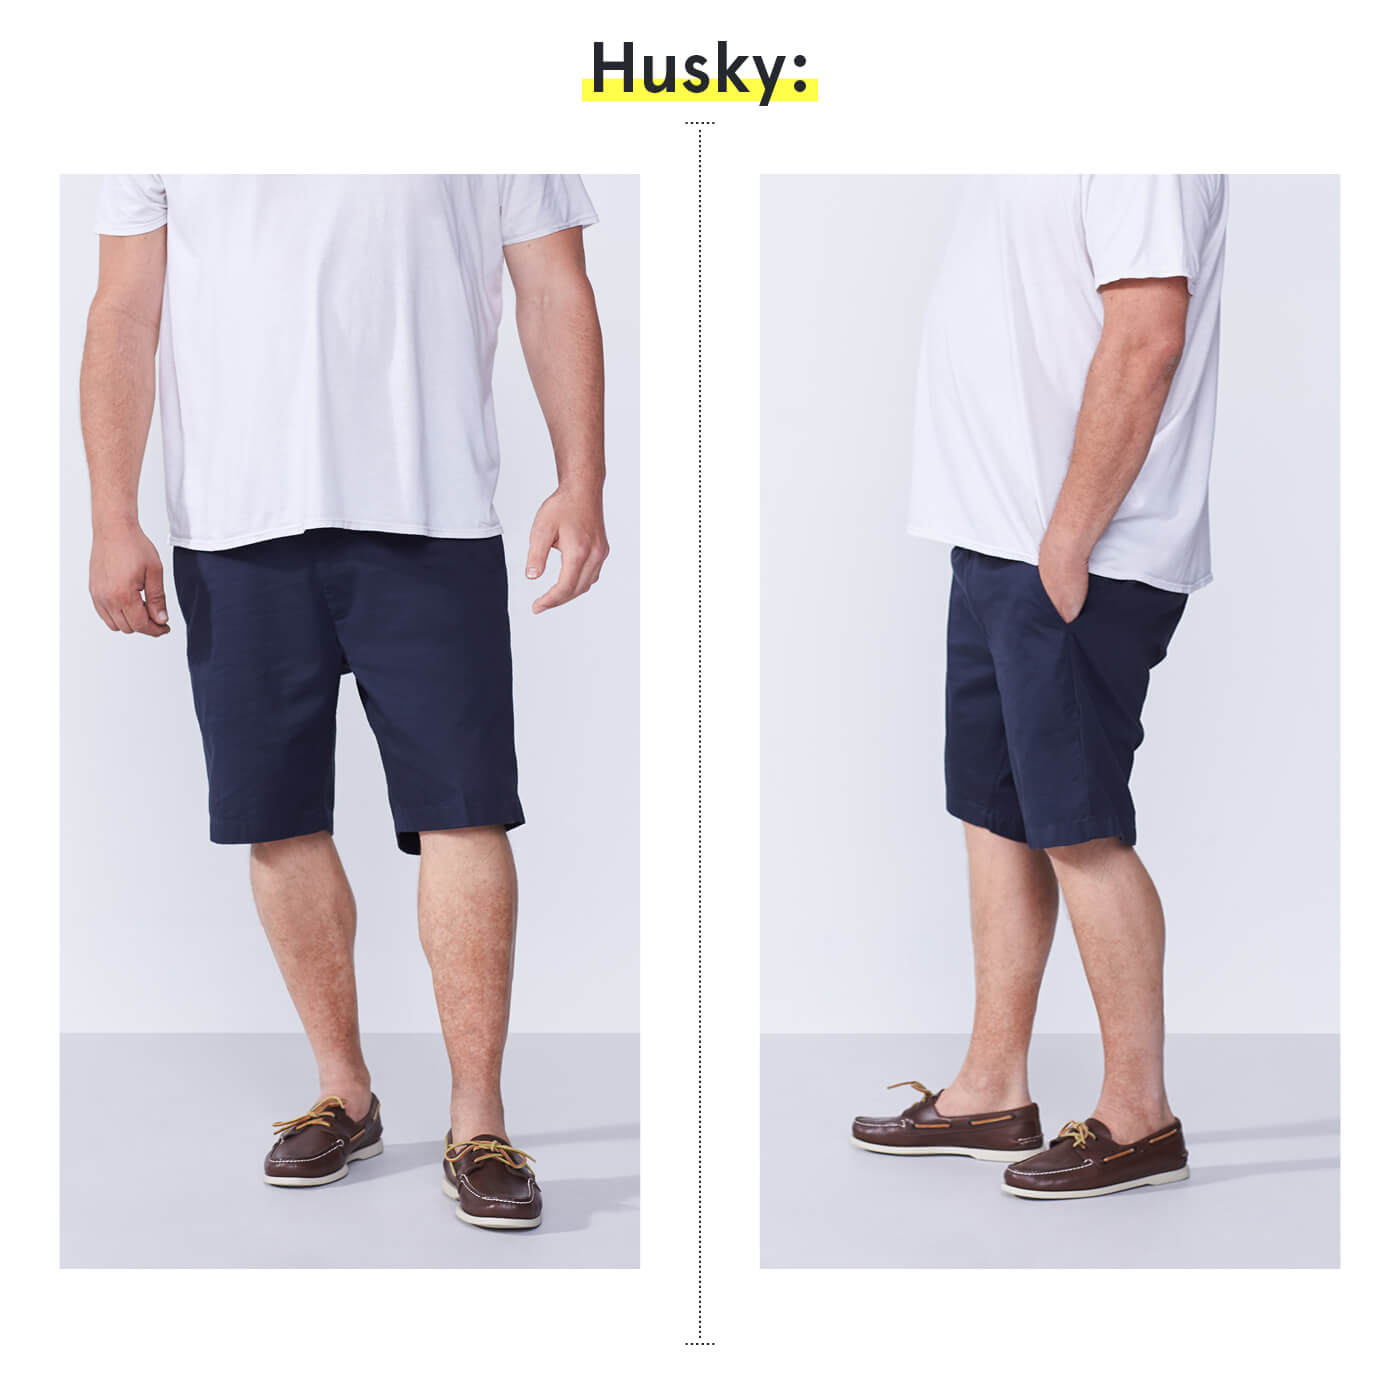 The Best Stylist Fitting Shorts For Your Build Stitch Fix Men